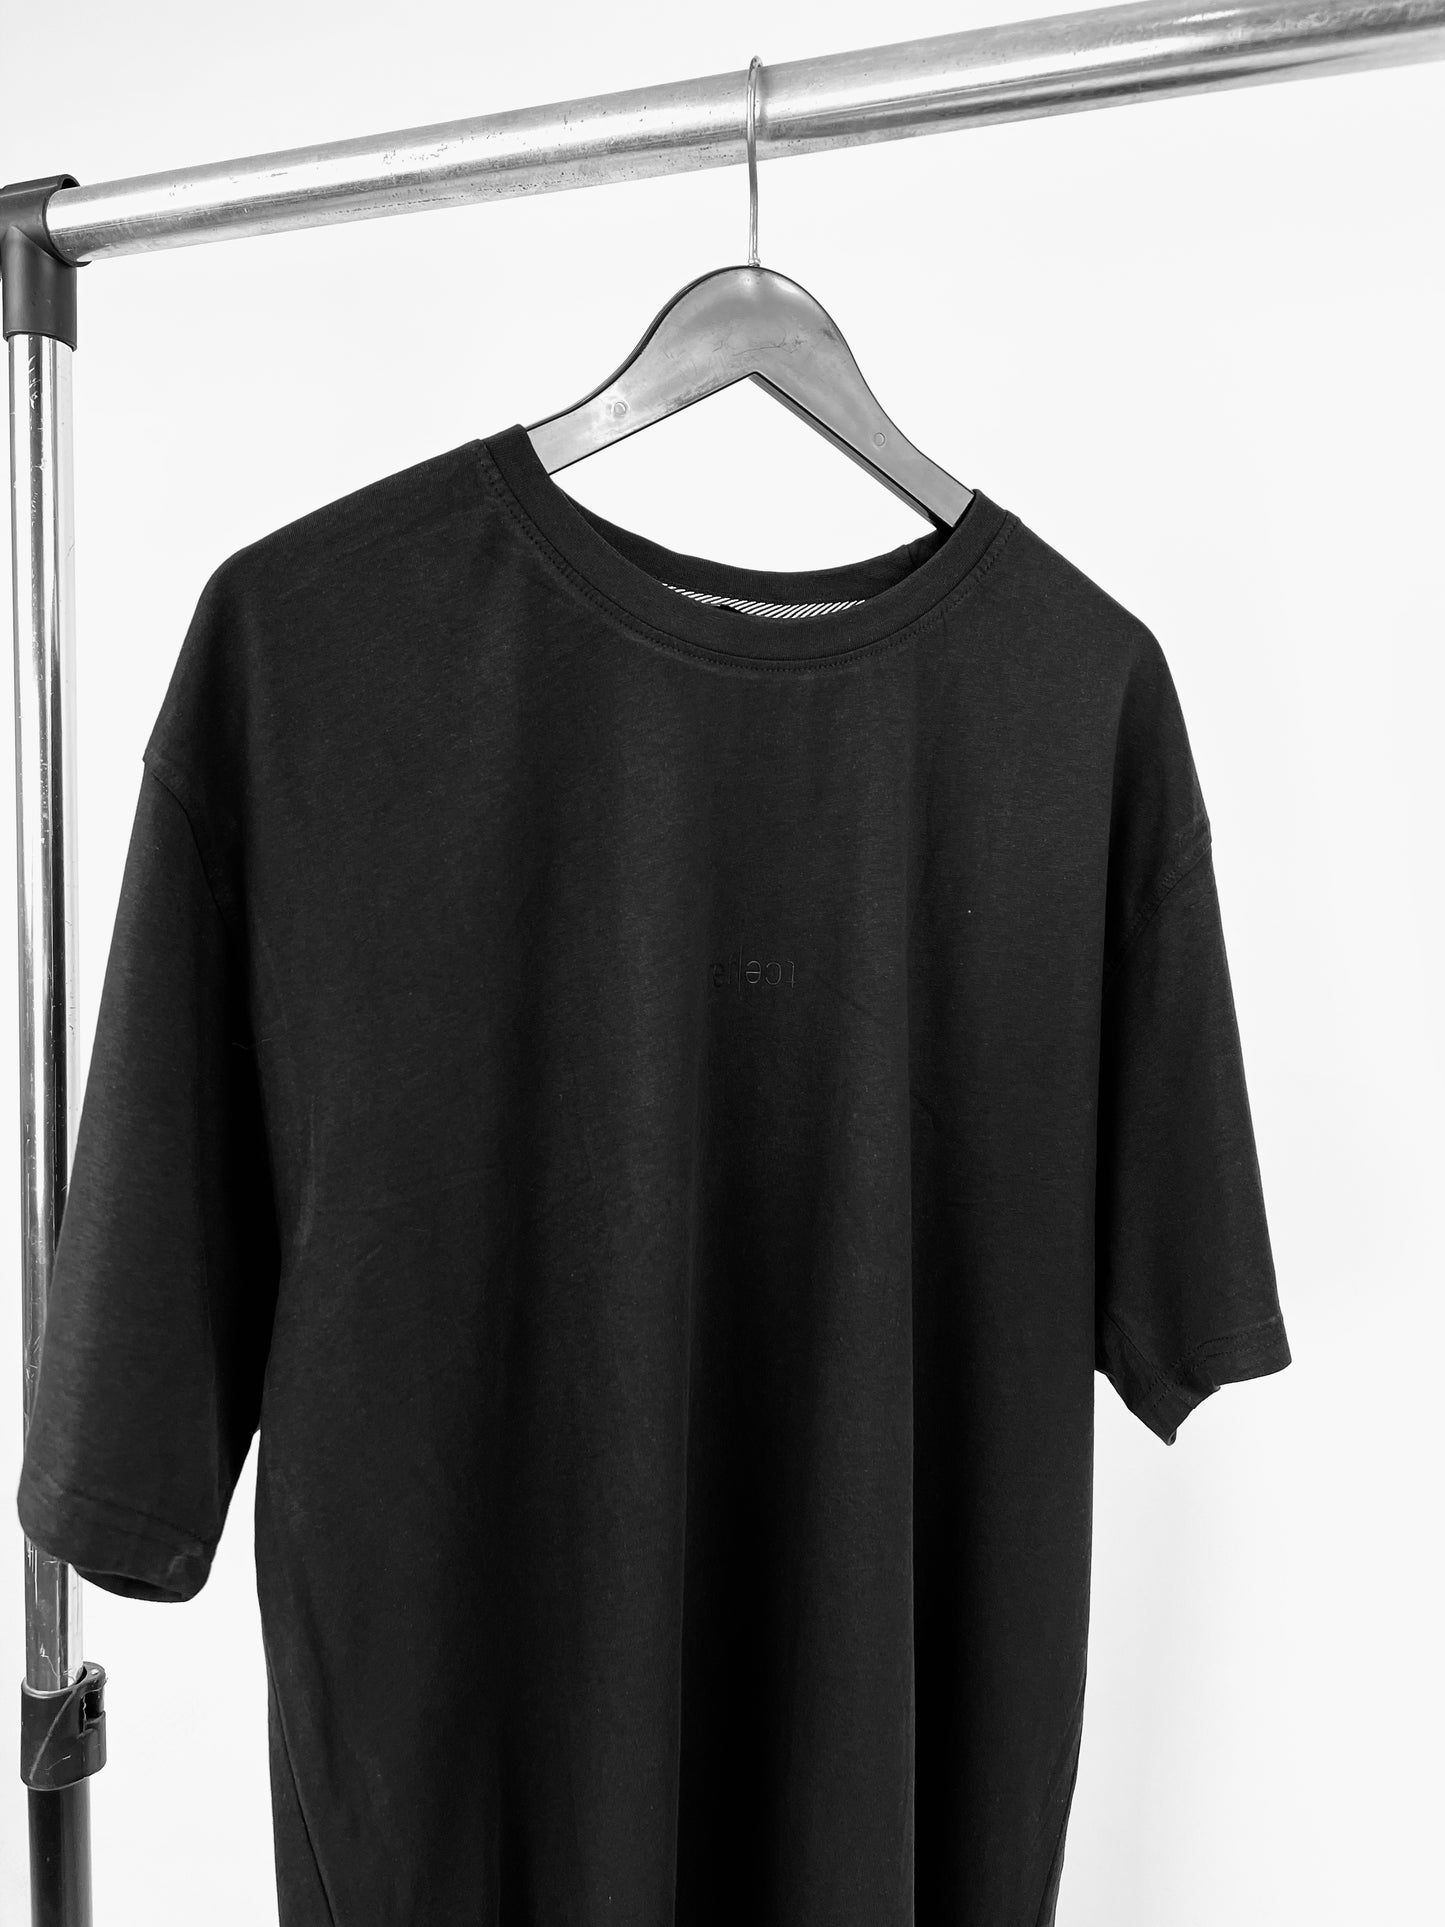 Solid reflect print T-shirt in black